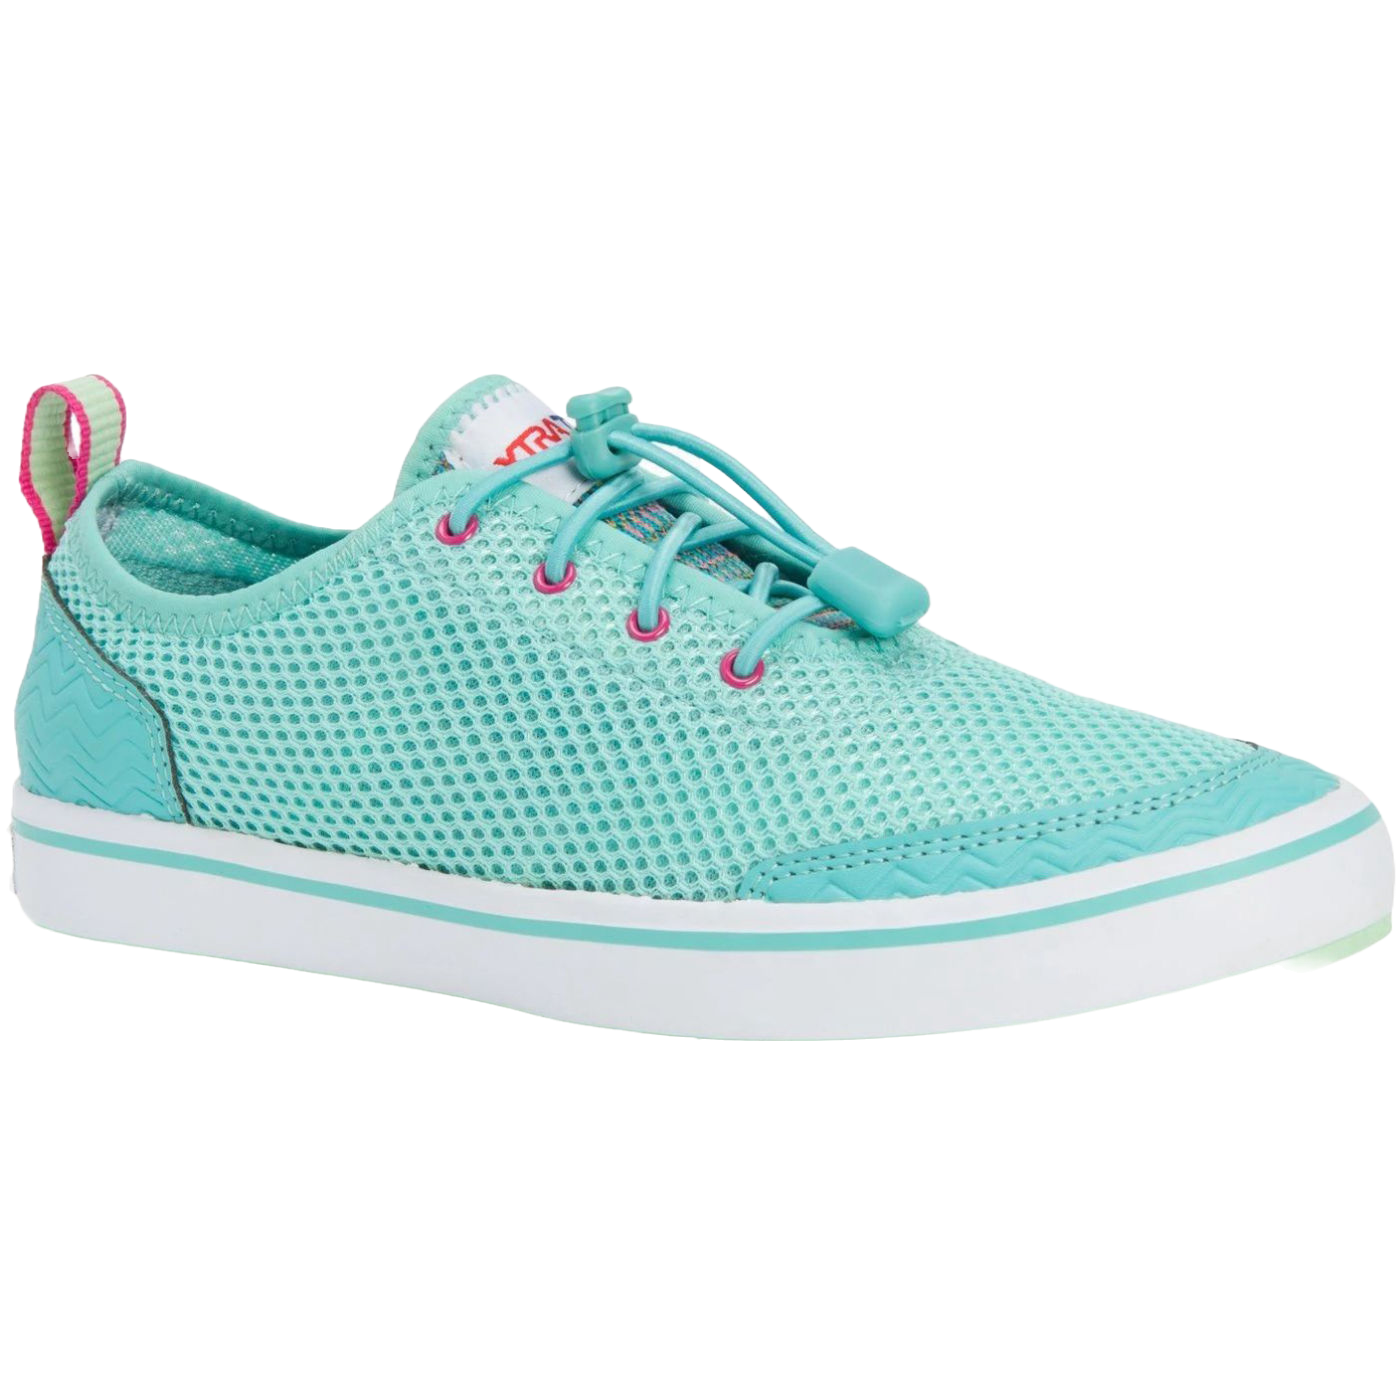 XTRATUF Ladies Riptide Water Teal Performance Casual Shoes XWR301